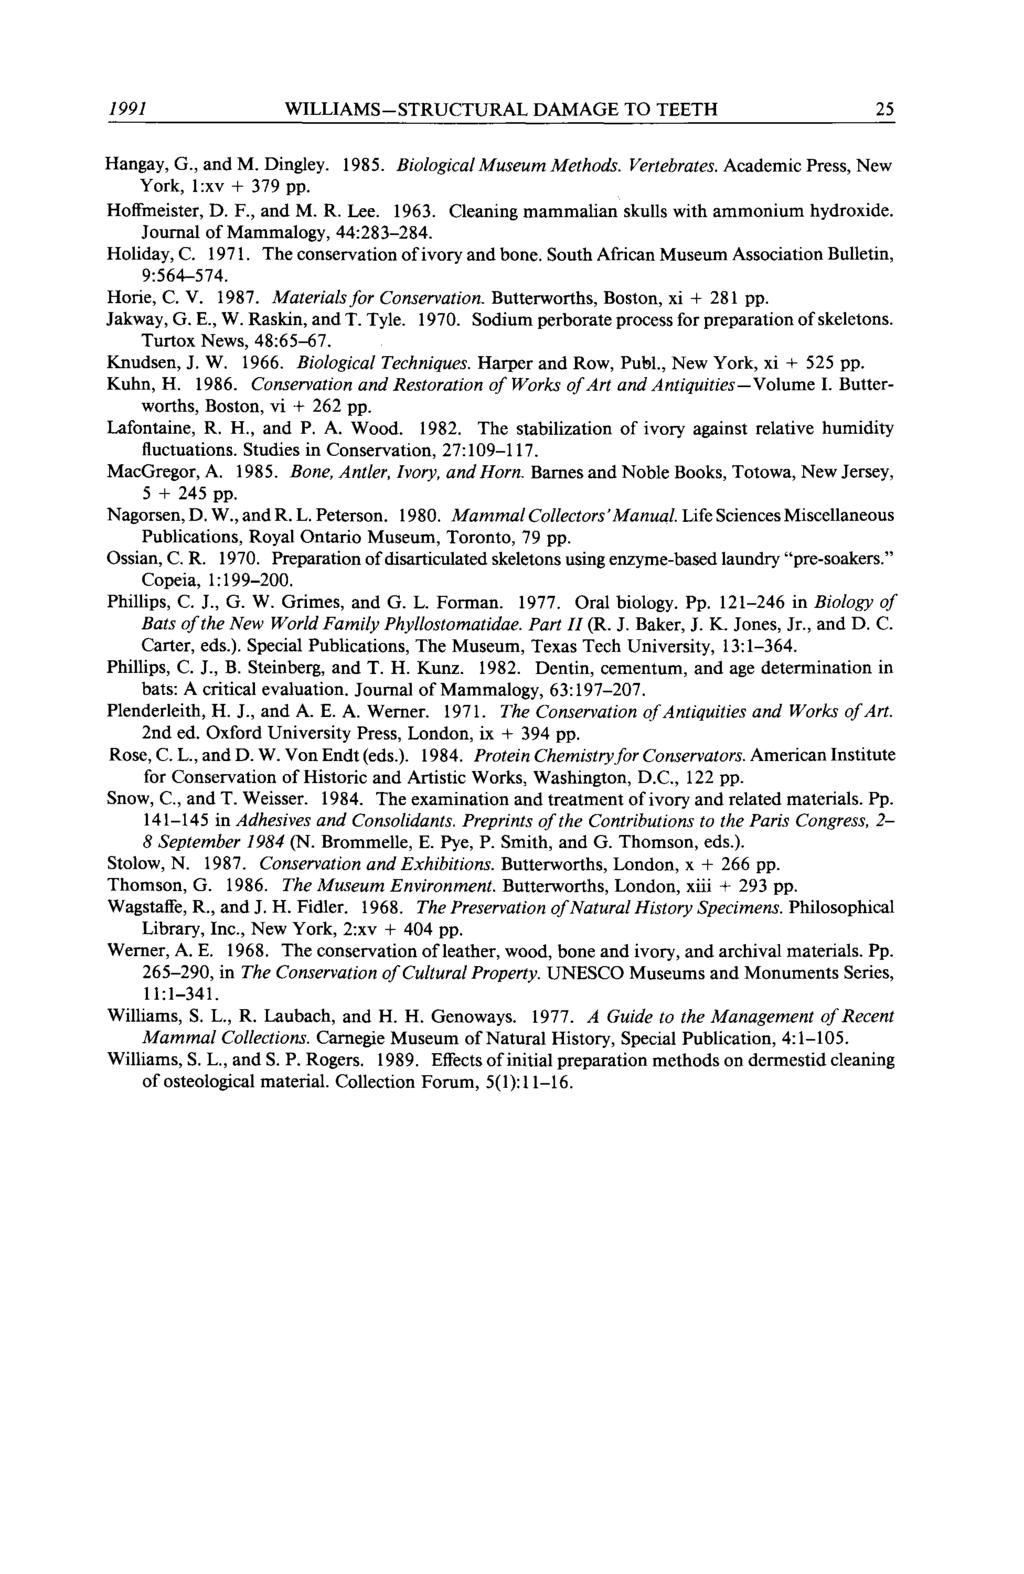 1991 WILLIAMS-STRUCTURAL DAMAGE TO TEETH 25 Hangay, G., and M. Dingley. 1985. Biological Museum Methods. Vertebrates. Academic Press, New York, 1 :xv + 379 pp. Hoffmeister, D. F., and M. R. Lee. 1963.